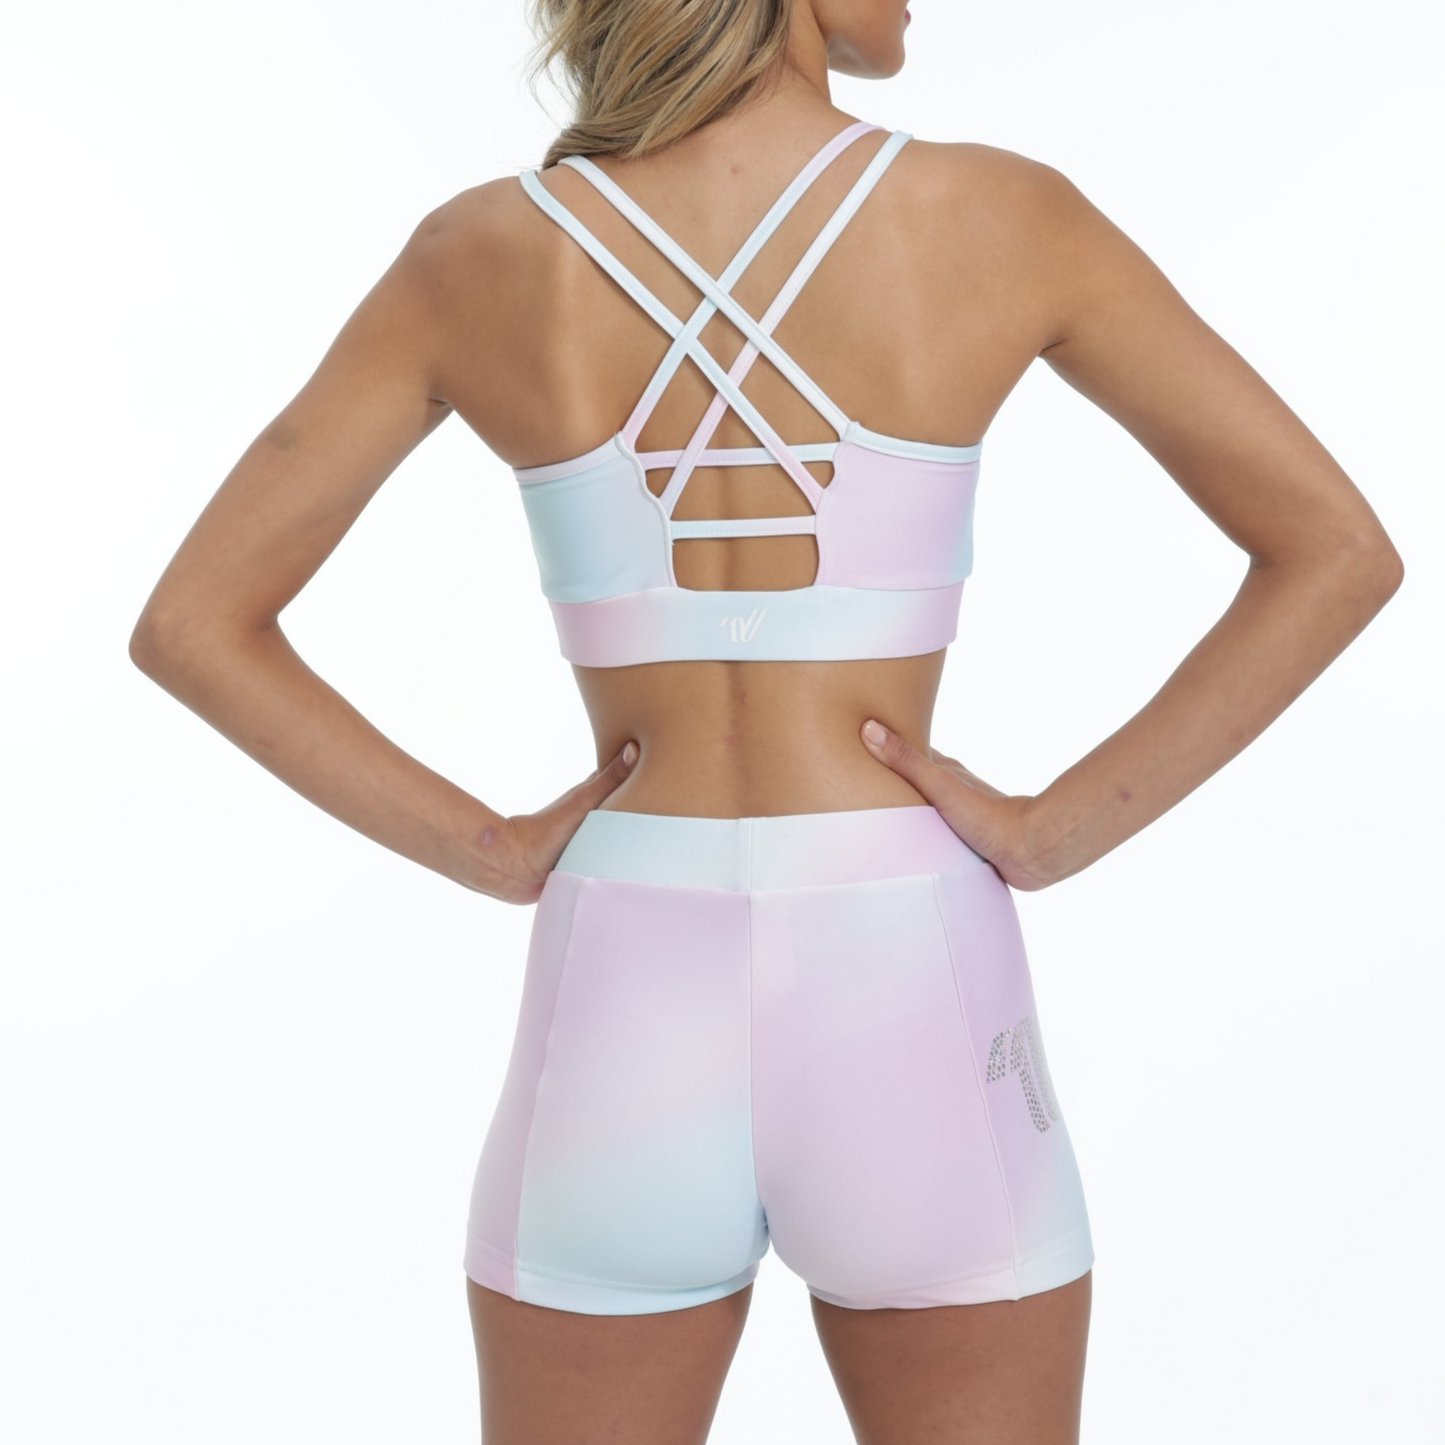 Cheer Sports Bras, Undergear, and More